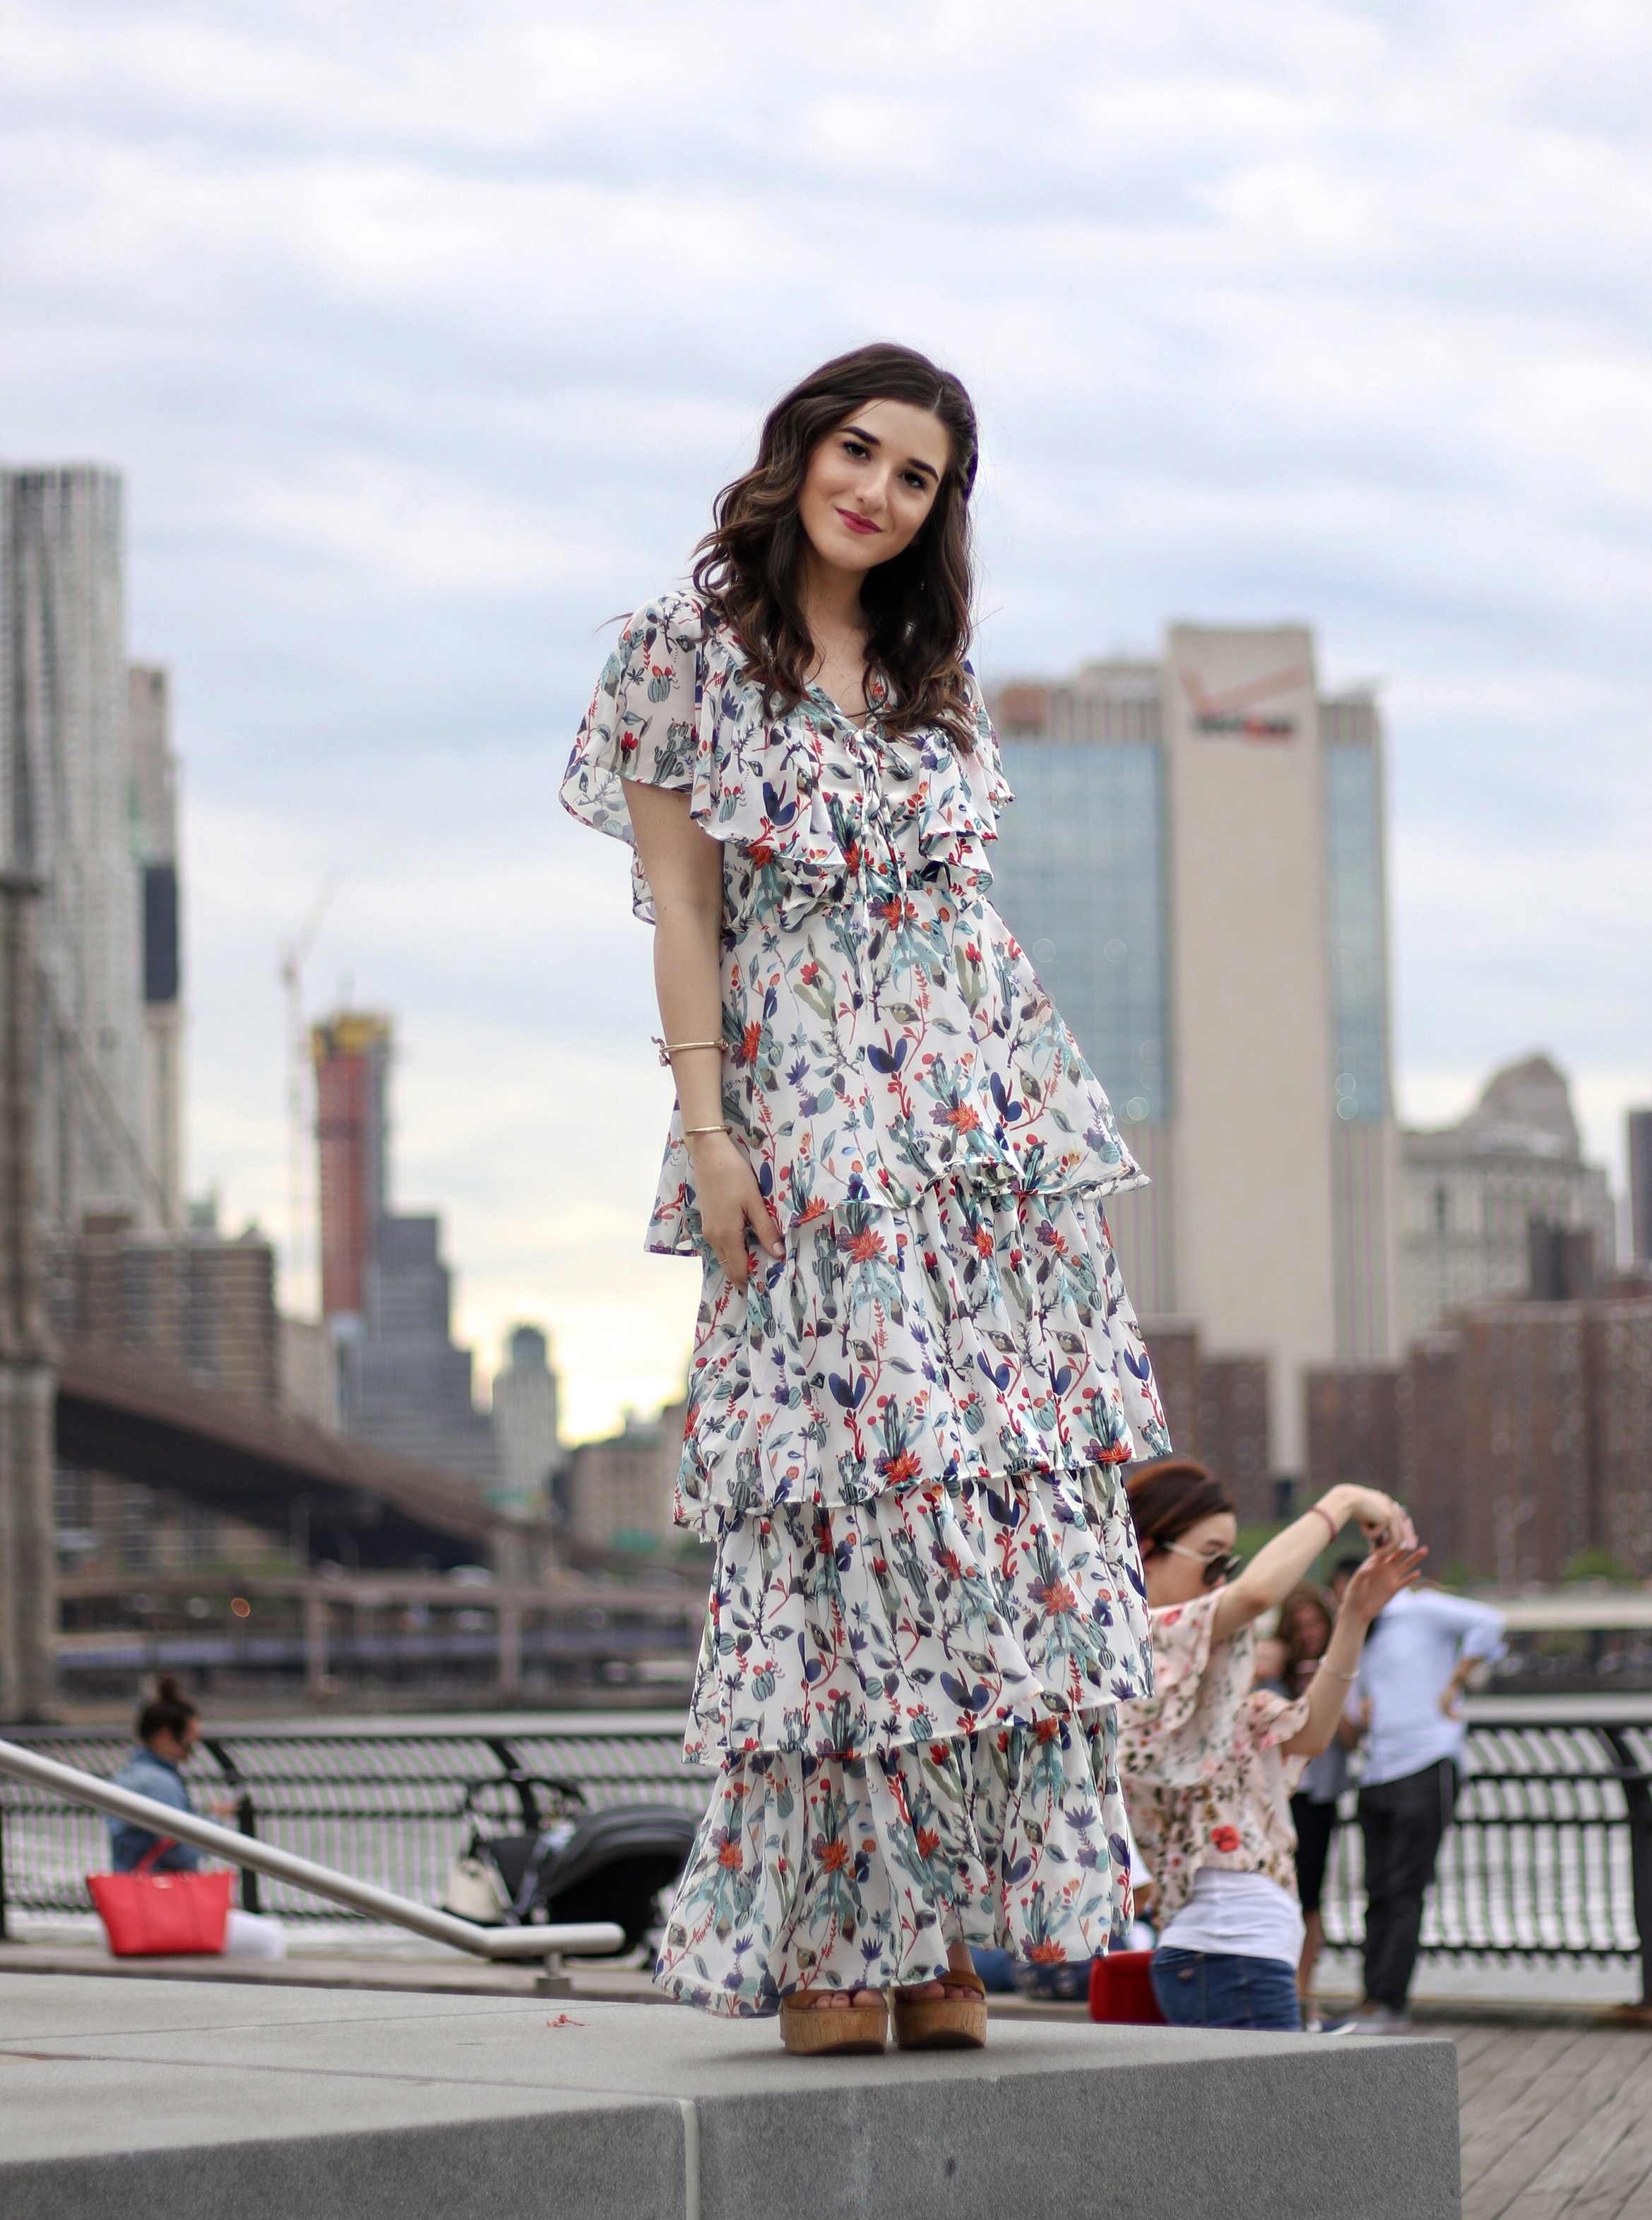 Ruffle Floral Maxi Dress Why You Should Trust Me Esther Santer Fashion Blog NYC Street Style Blogger Outfit OOTD Trendy Summer Outdoors Pretty Girly Photoshoot Feminine Beautiful Model Accessories Shoes Wedges Sandals Gold Bracelets Jewelry Shop Women.JPG